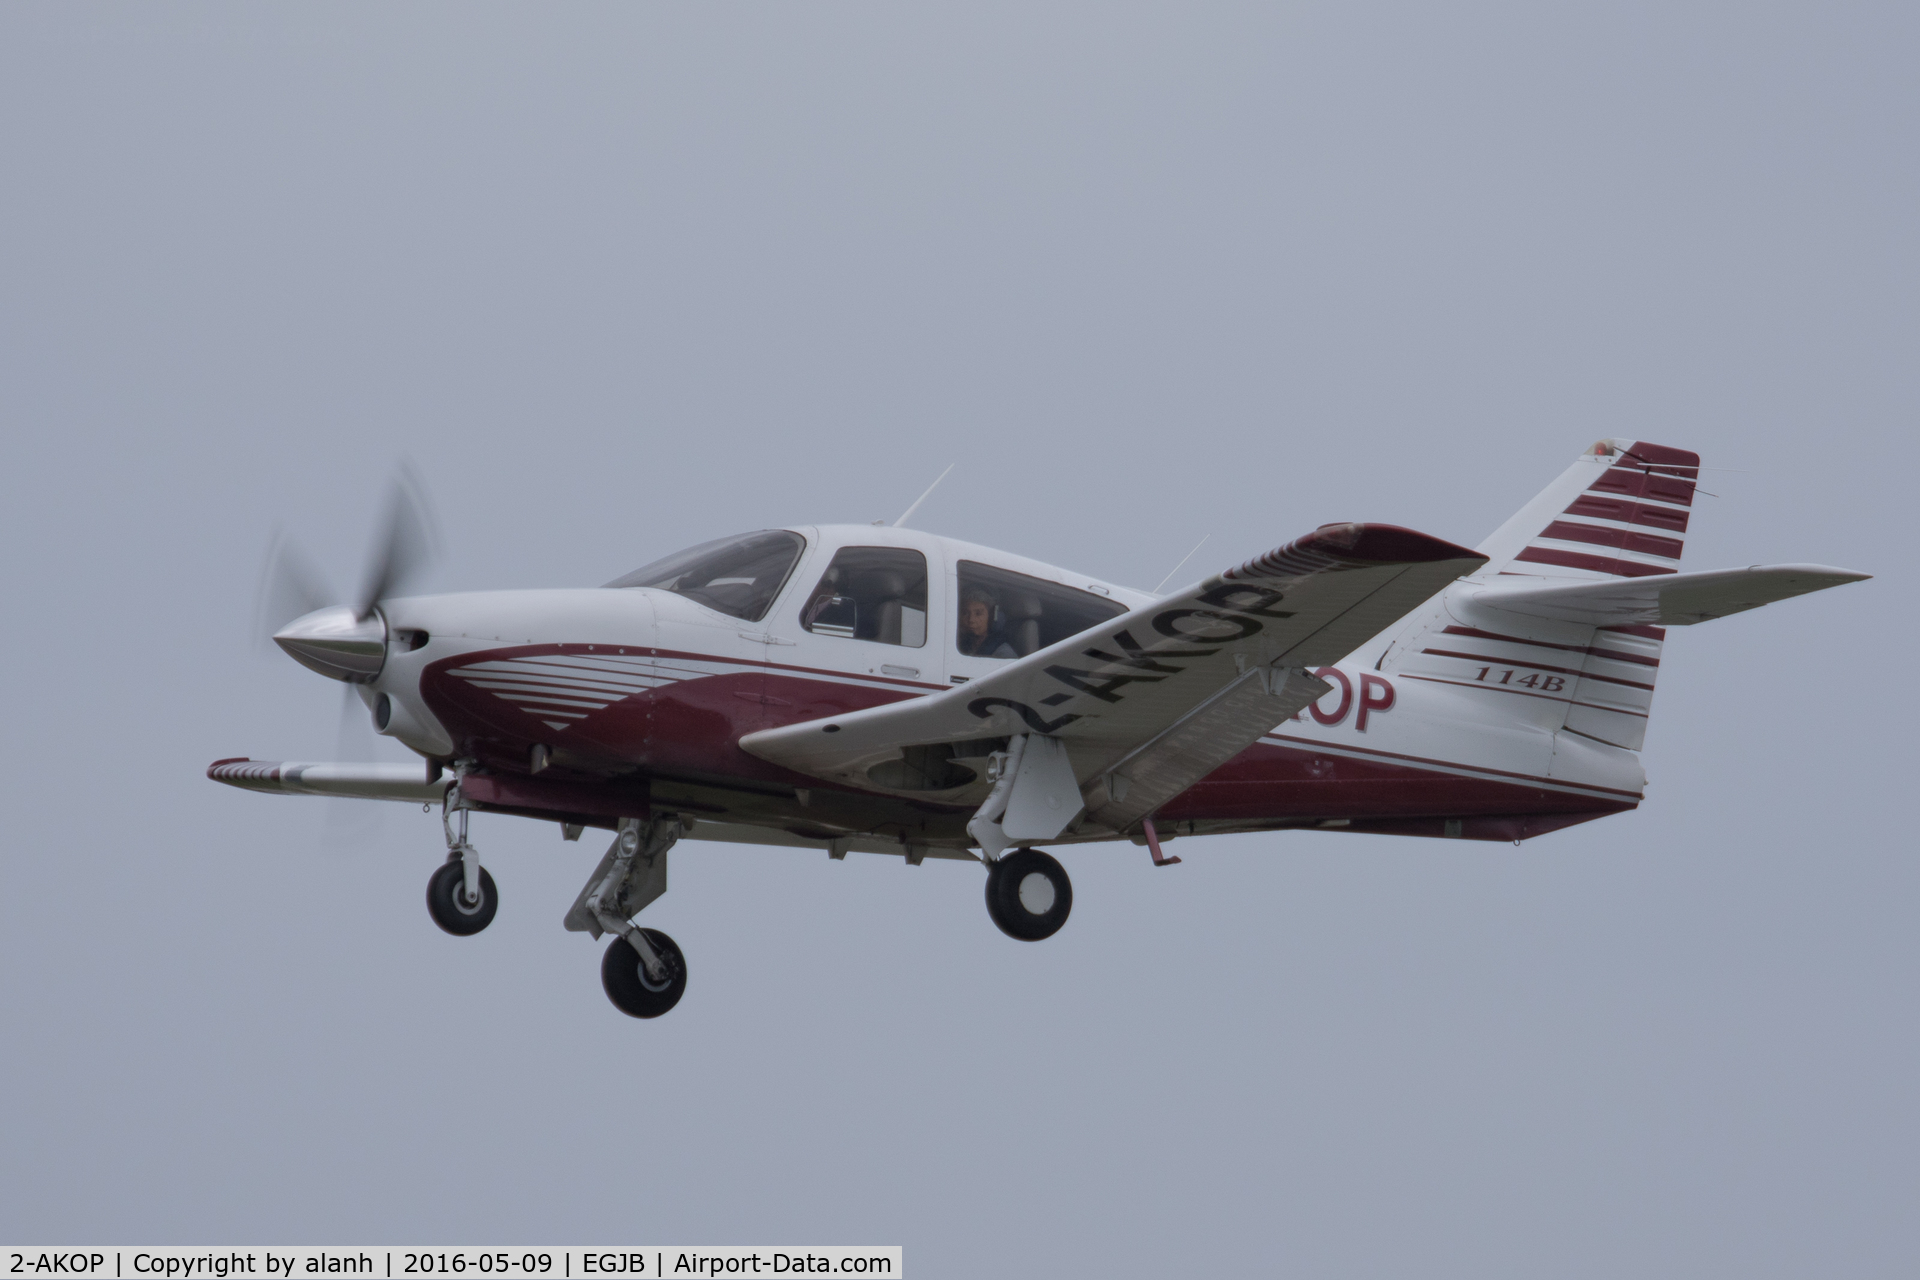 2-AKOP, 1999 Rockwell Commander 114B C/N 14663, Departing Guernsey on a grey, wet day